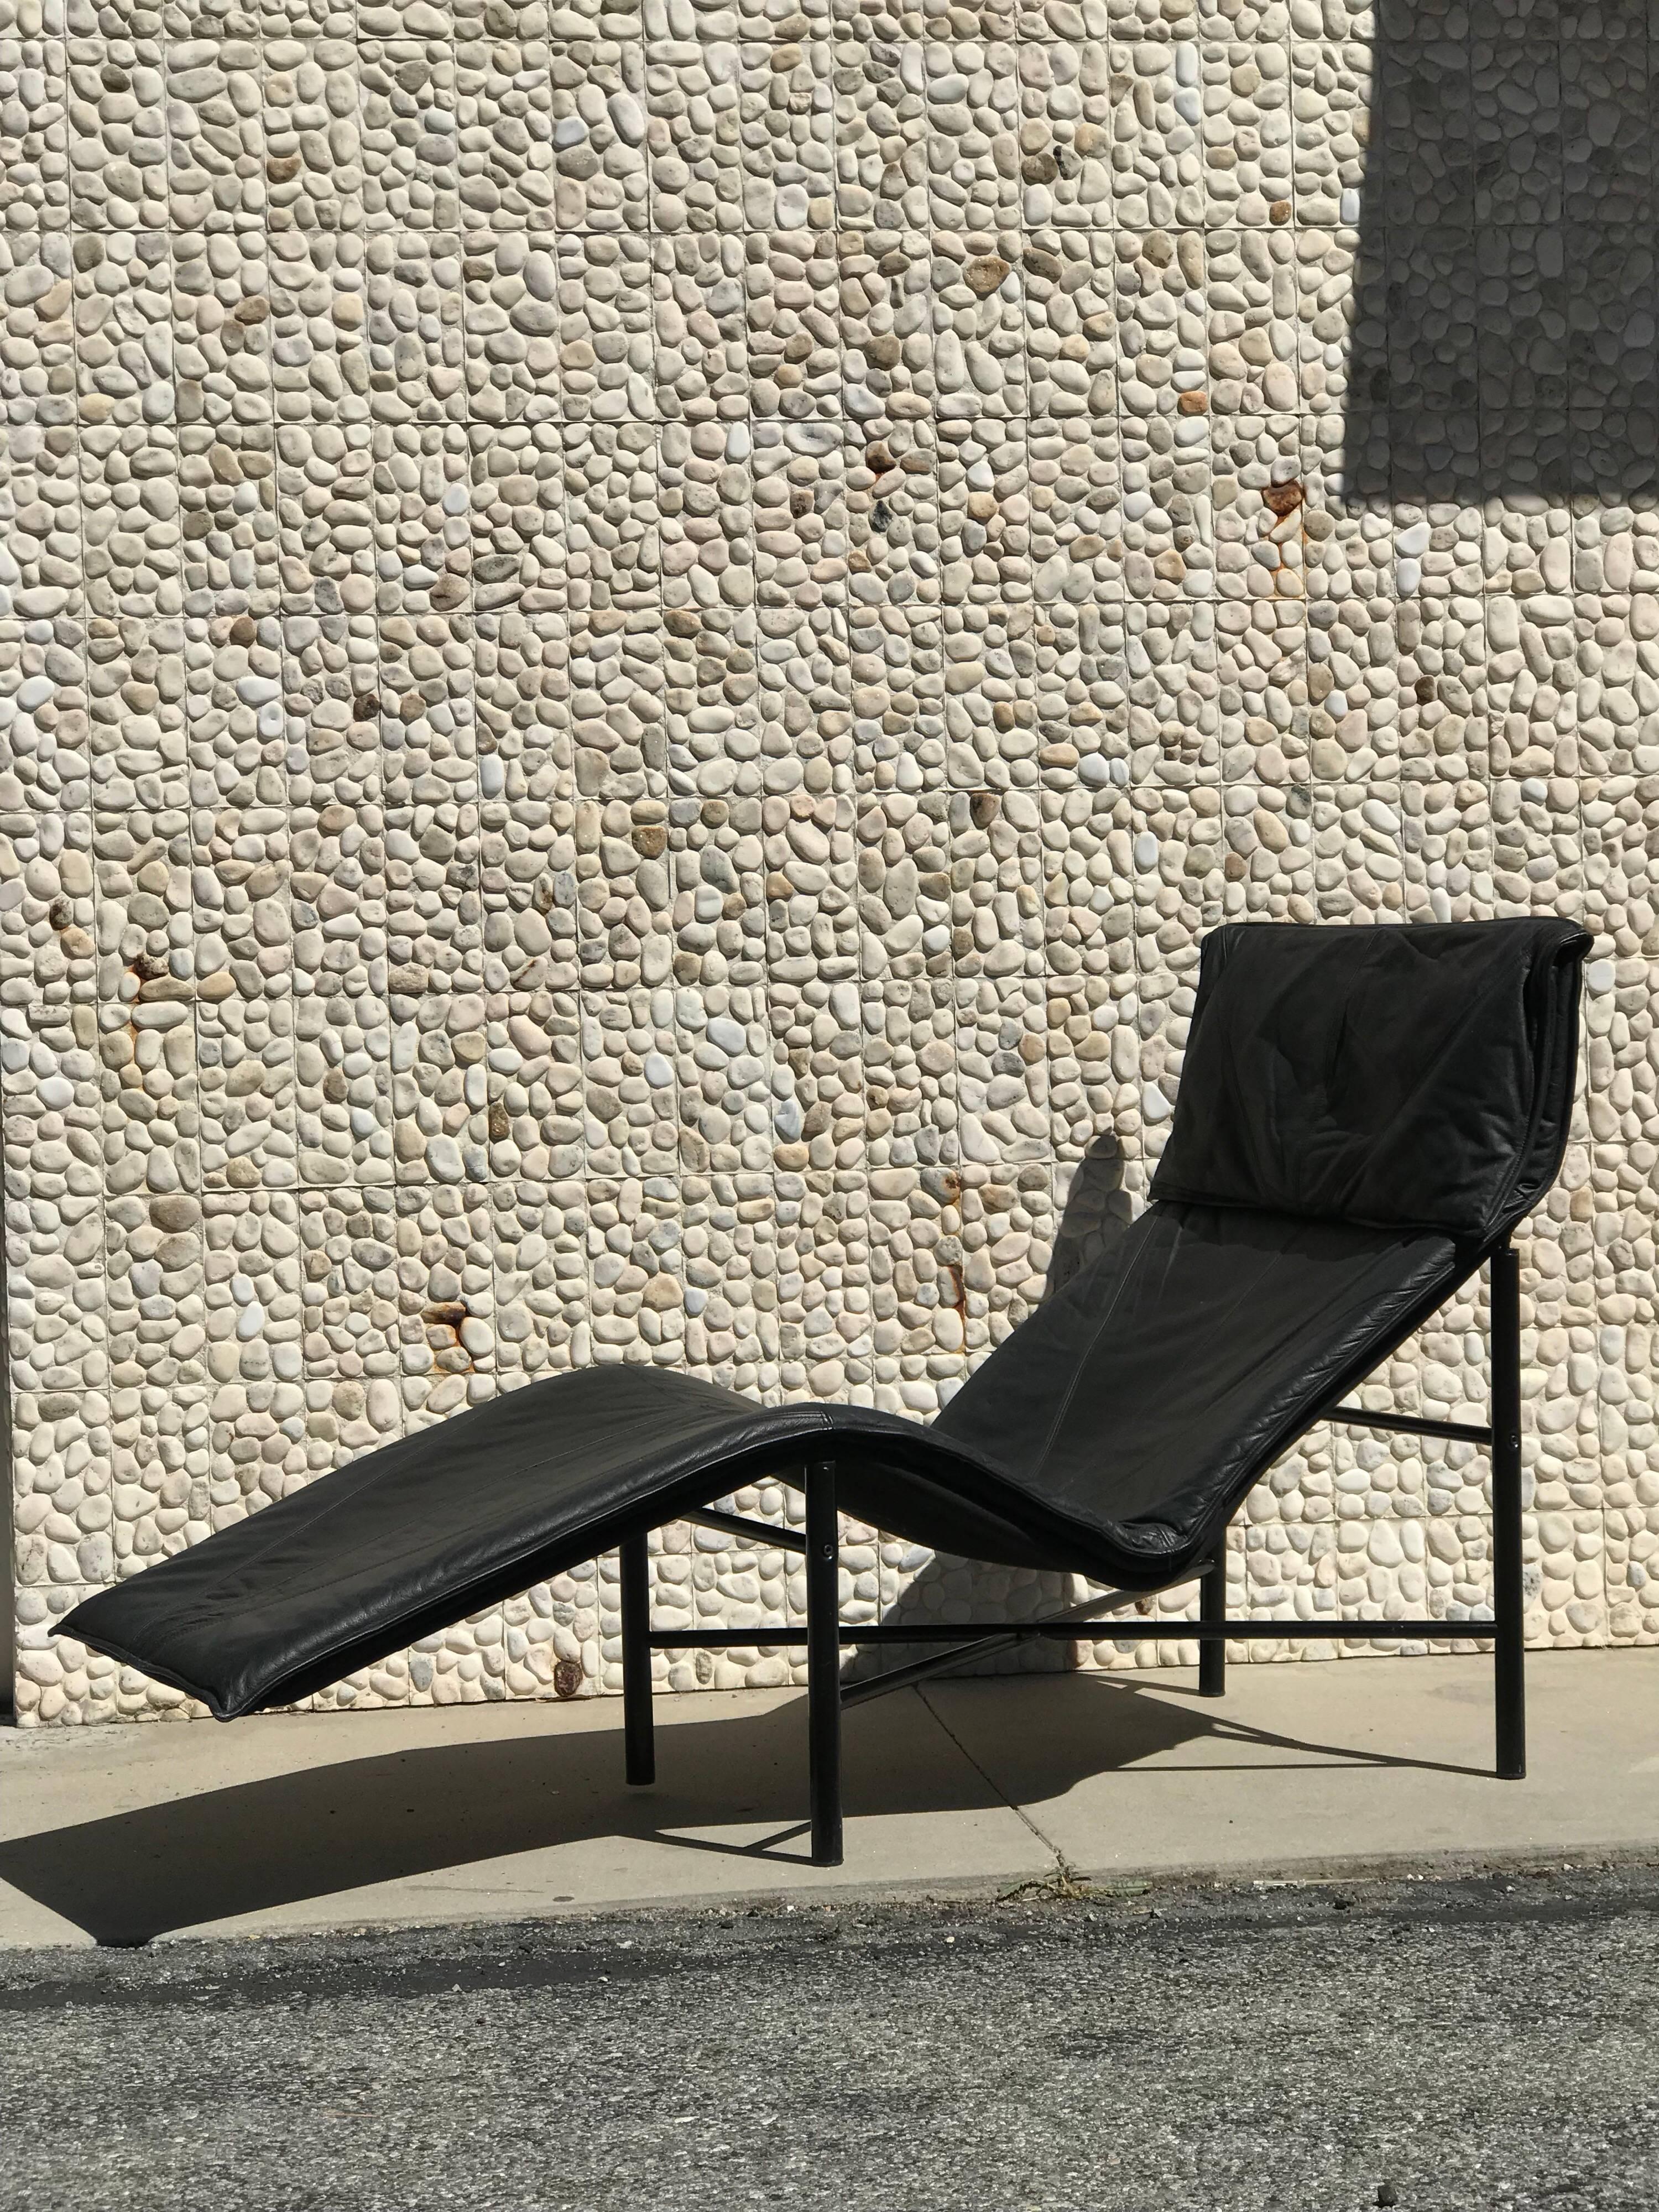 From a very cool vintage architectural Palm Springs is a very modern chaise lounge designed by Tord Bjorklund. It looks as timeless and classic as when it was designed in the 1970s. Leather is in great original condition for it's age. Good at all